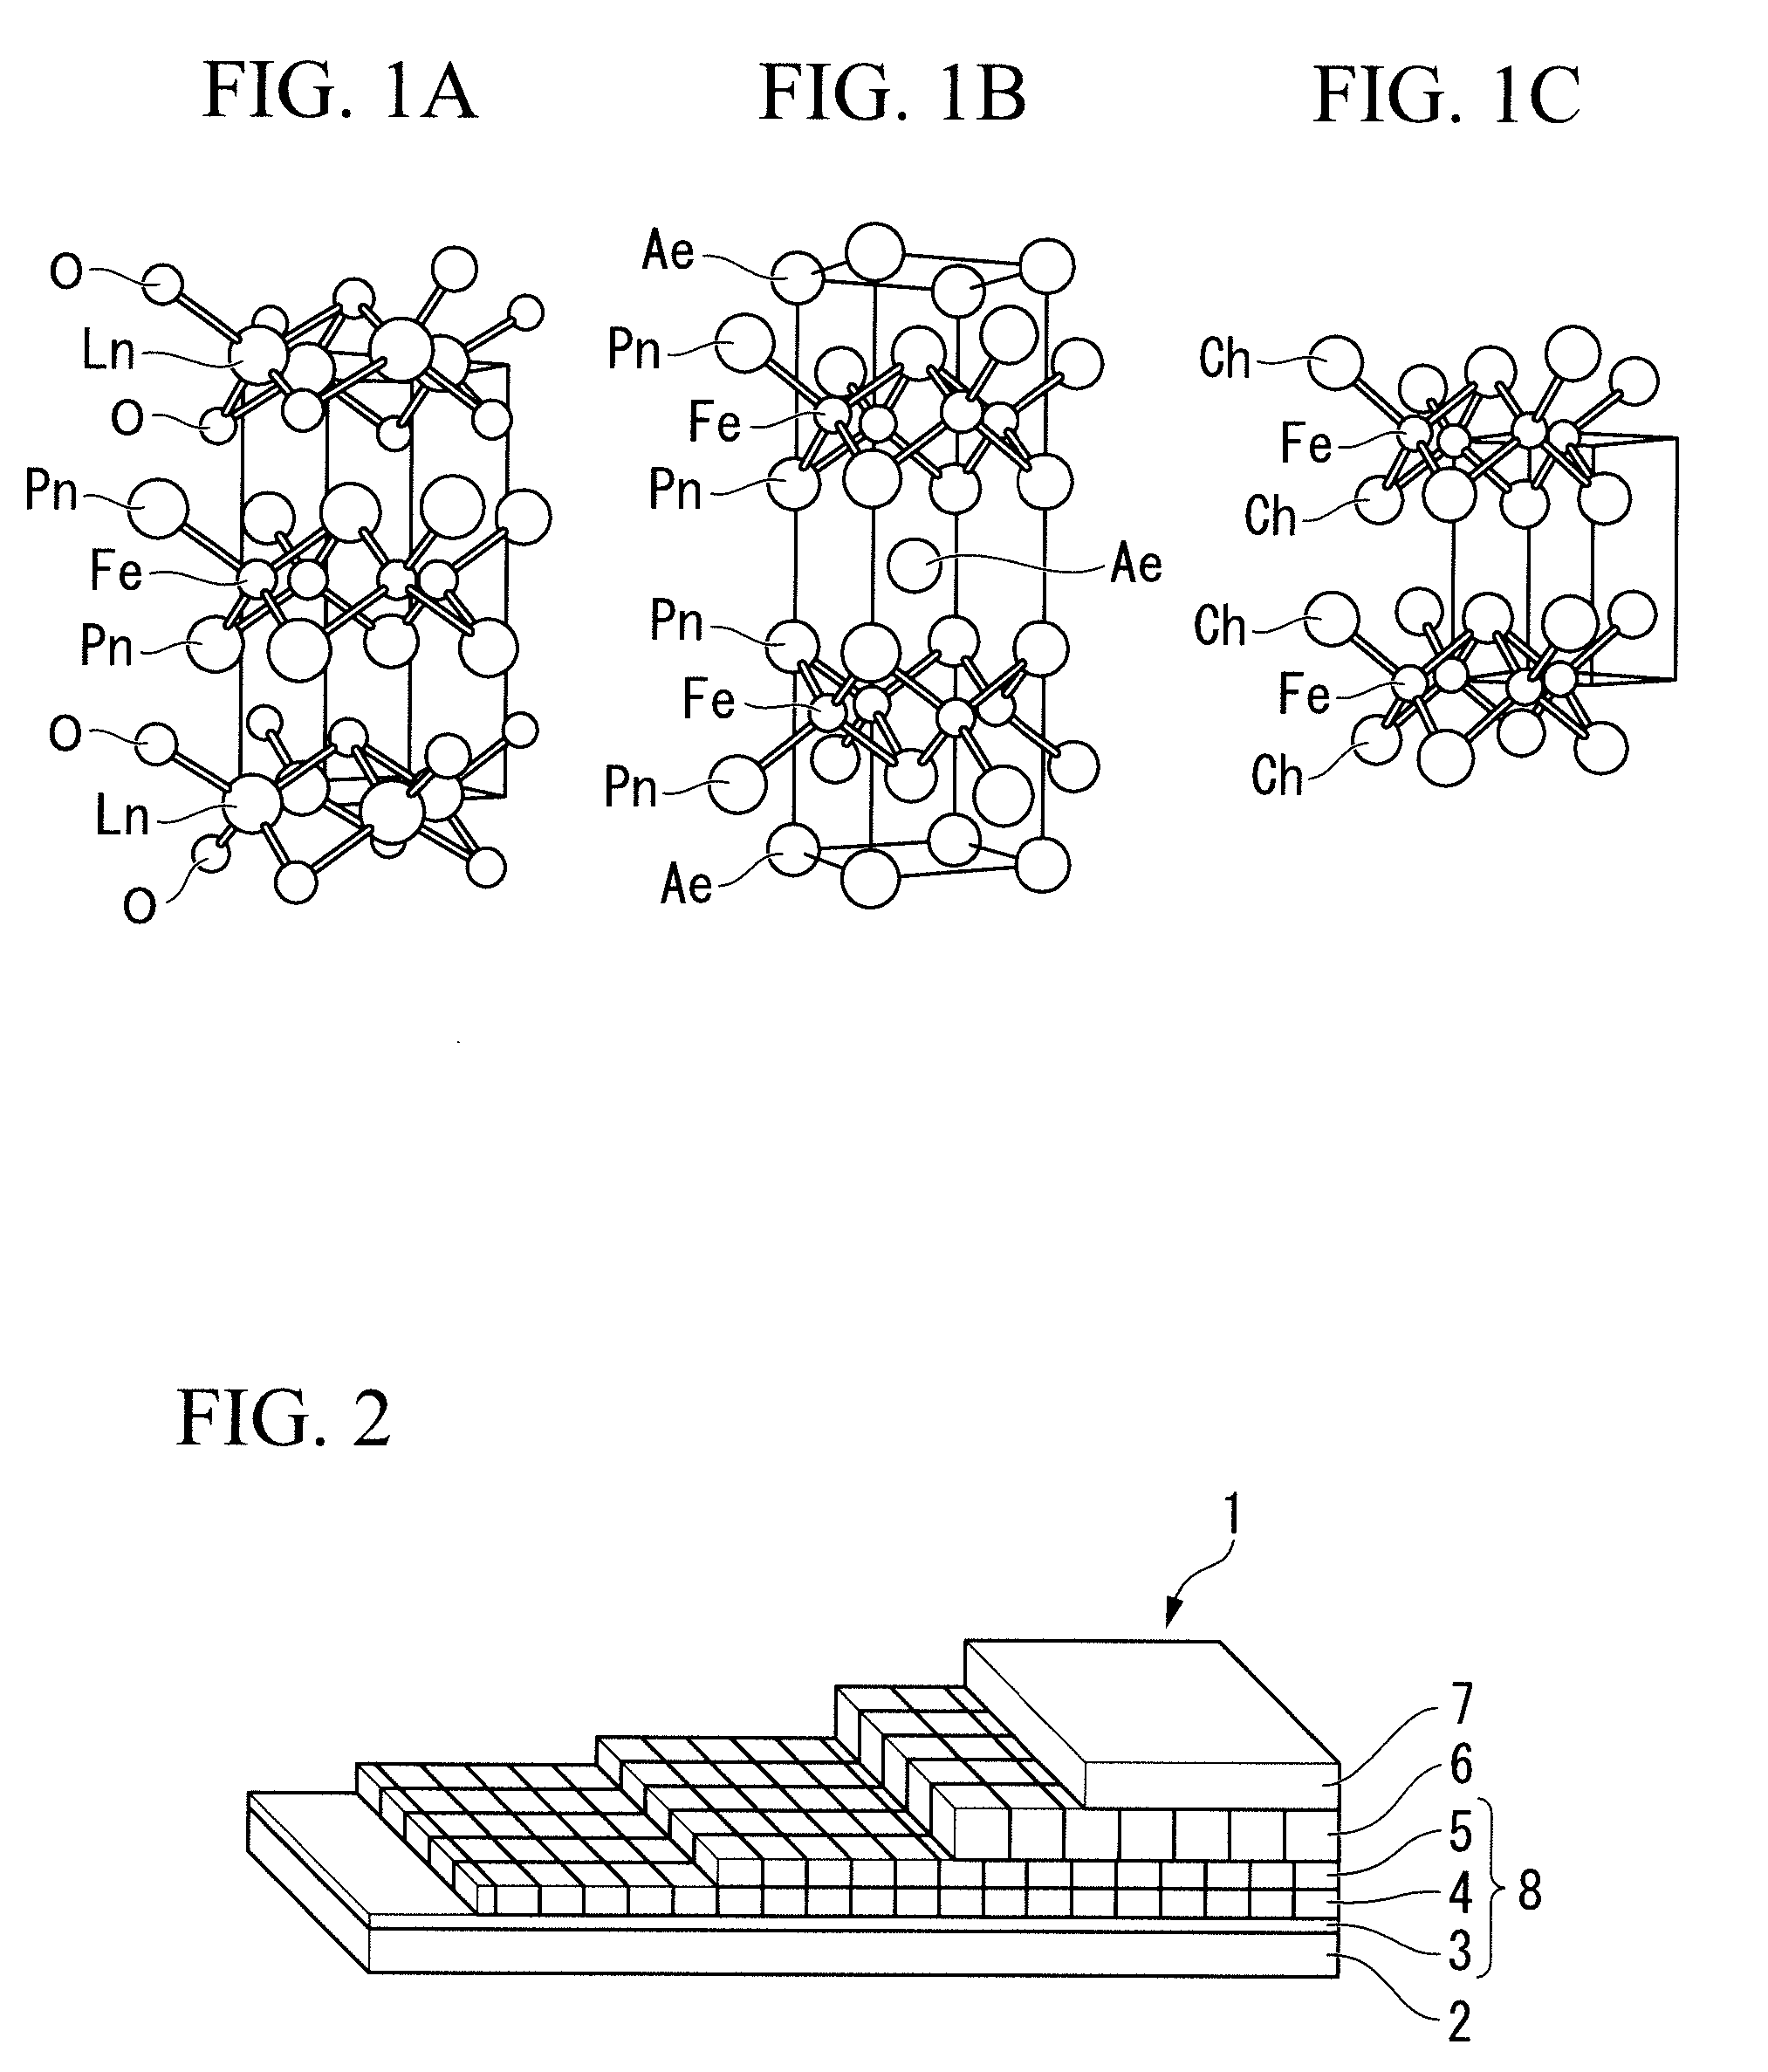 Iron-based superconducting material, iron-based superconducting layer, iron-based superconducting tape wire material, and iron-based superconducting wire material